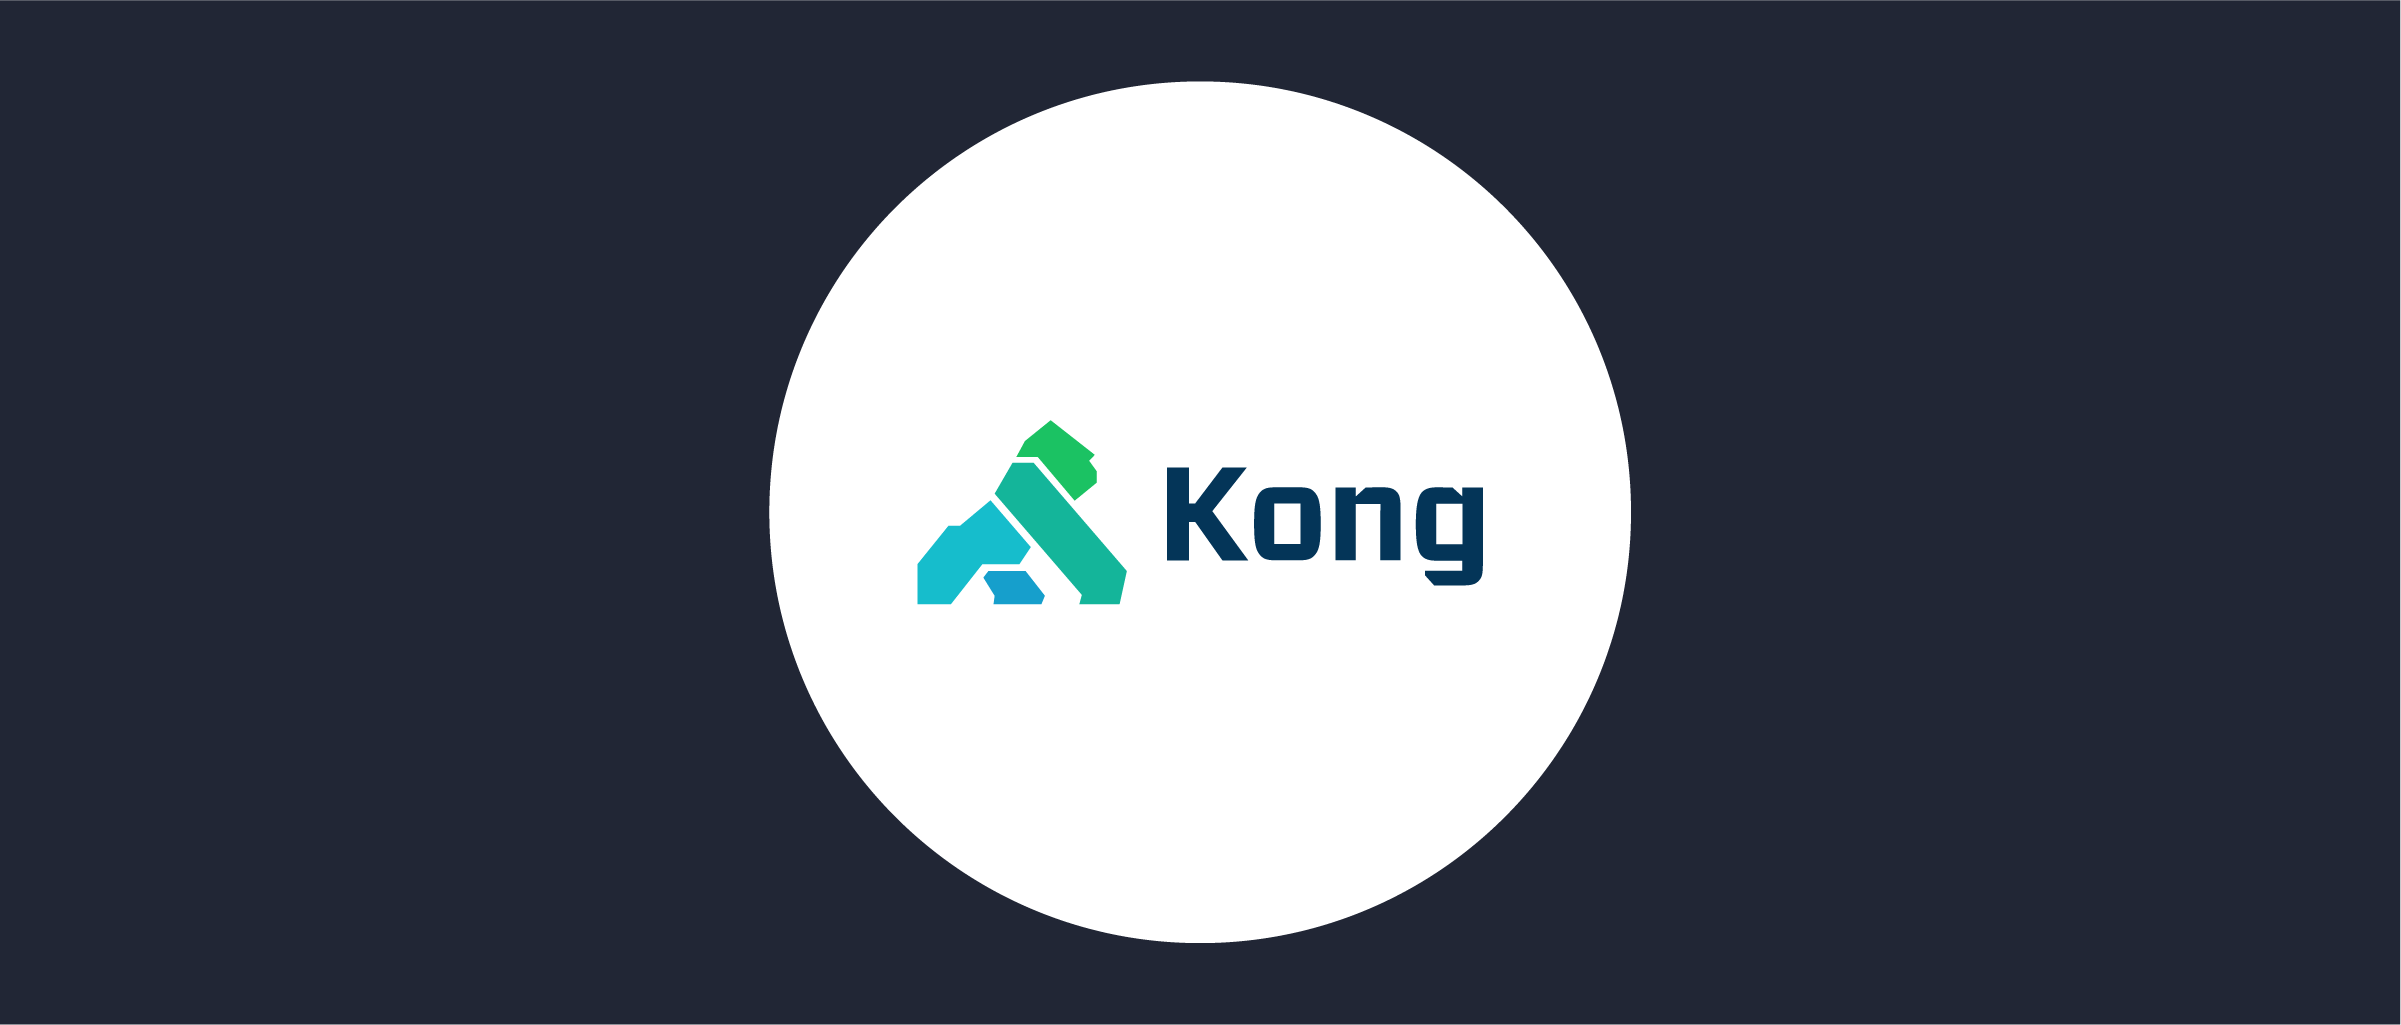 Setting up OpenID Connect Authentication in the Kong Developer Portal